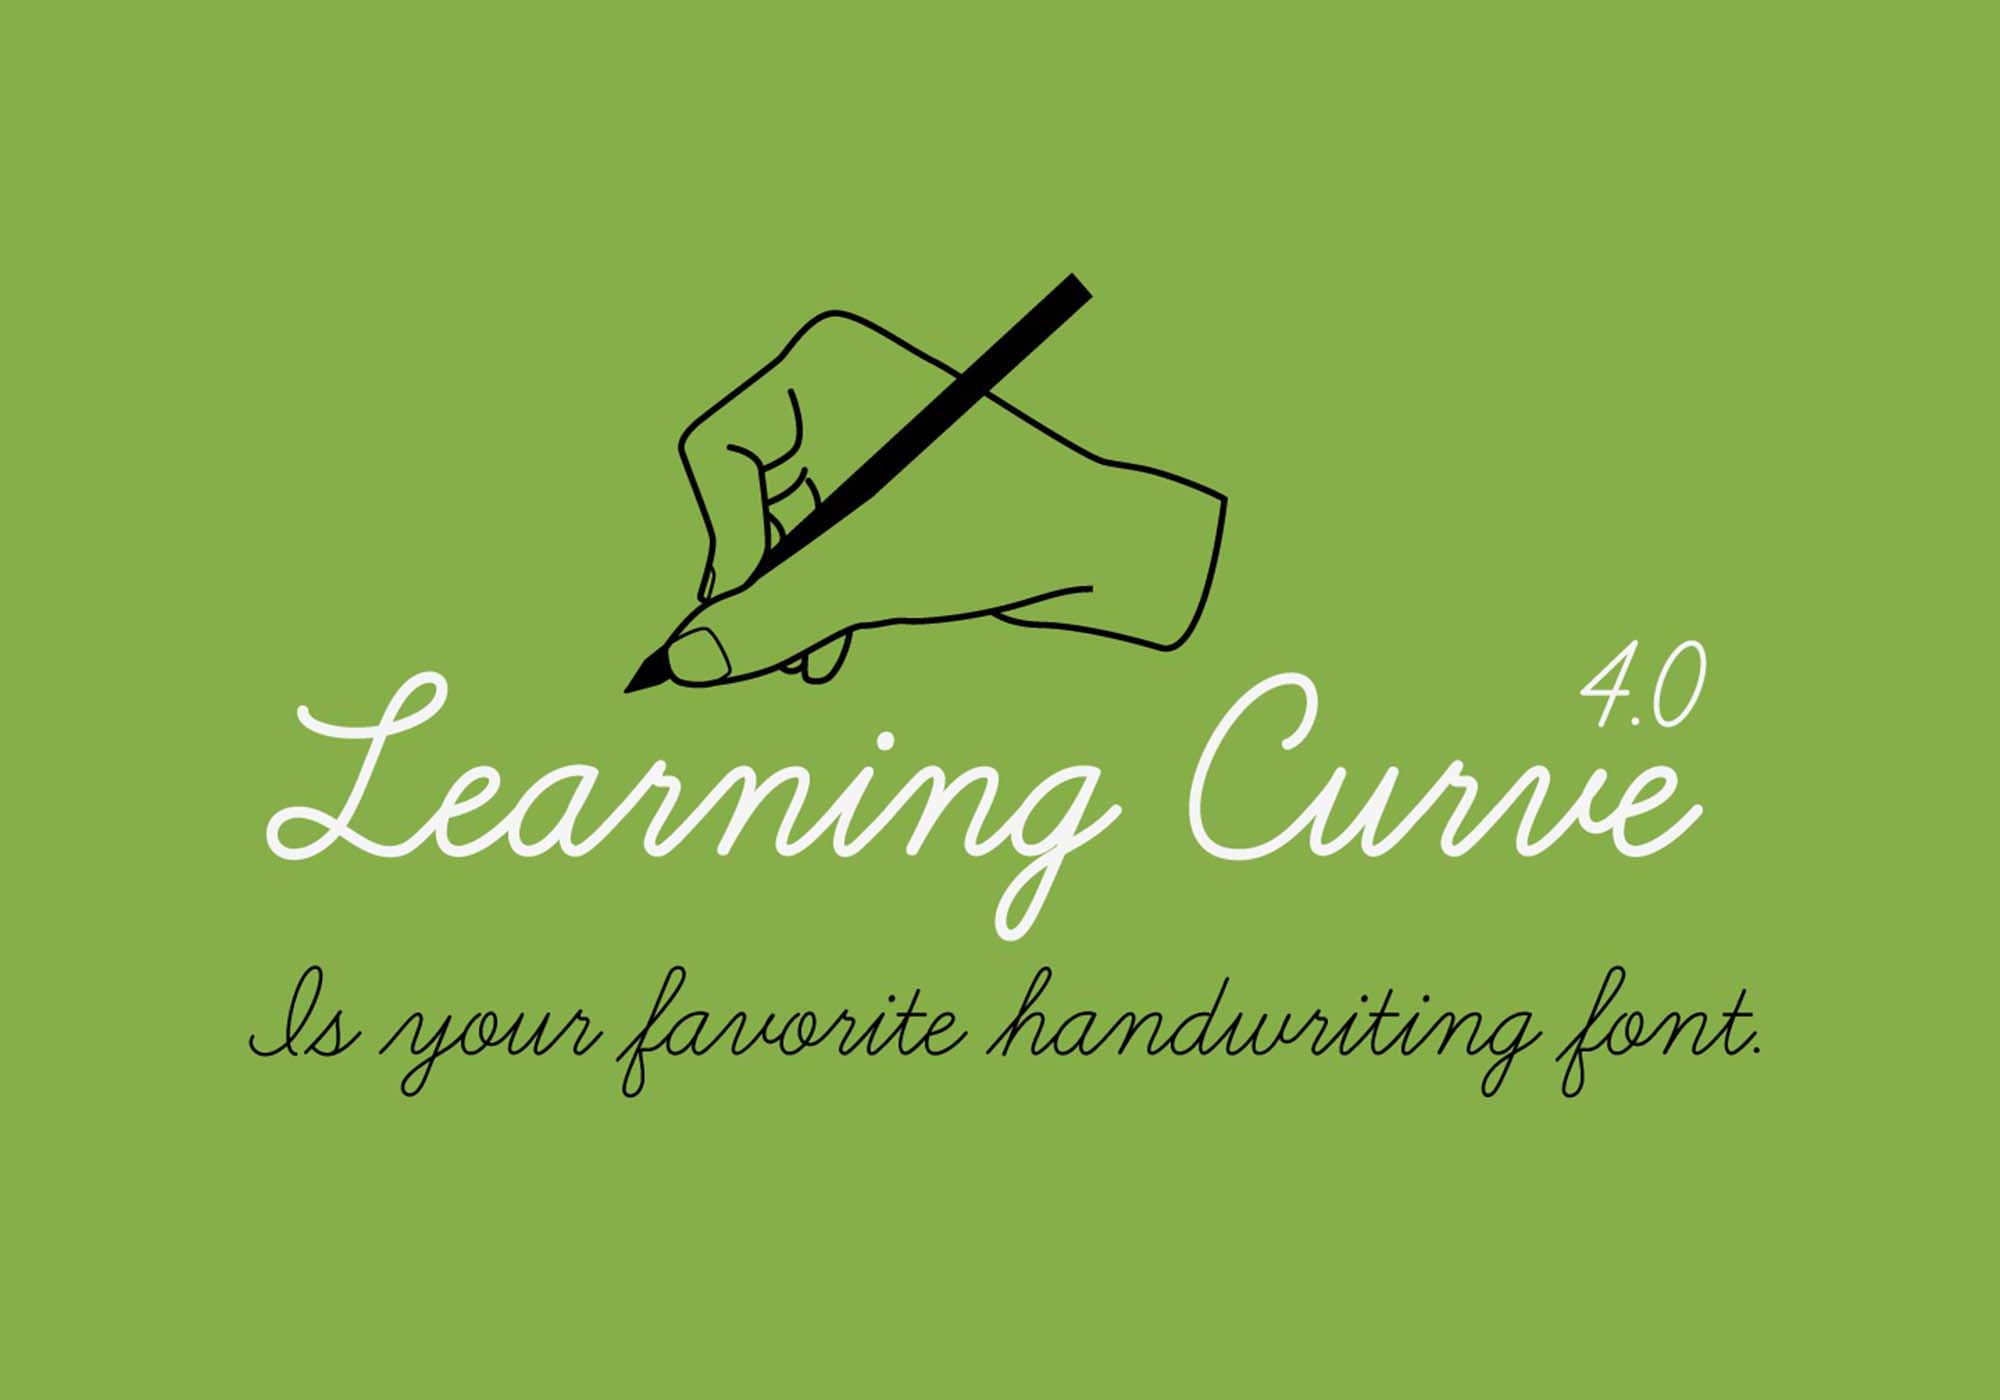 Learning Curve Font